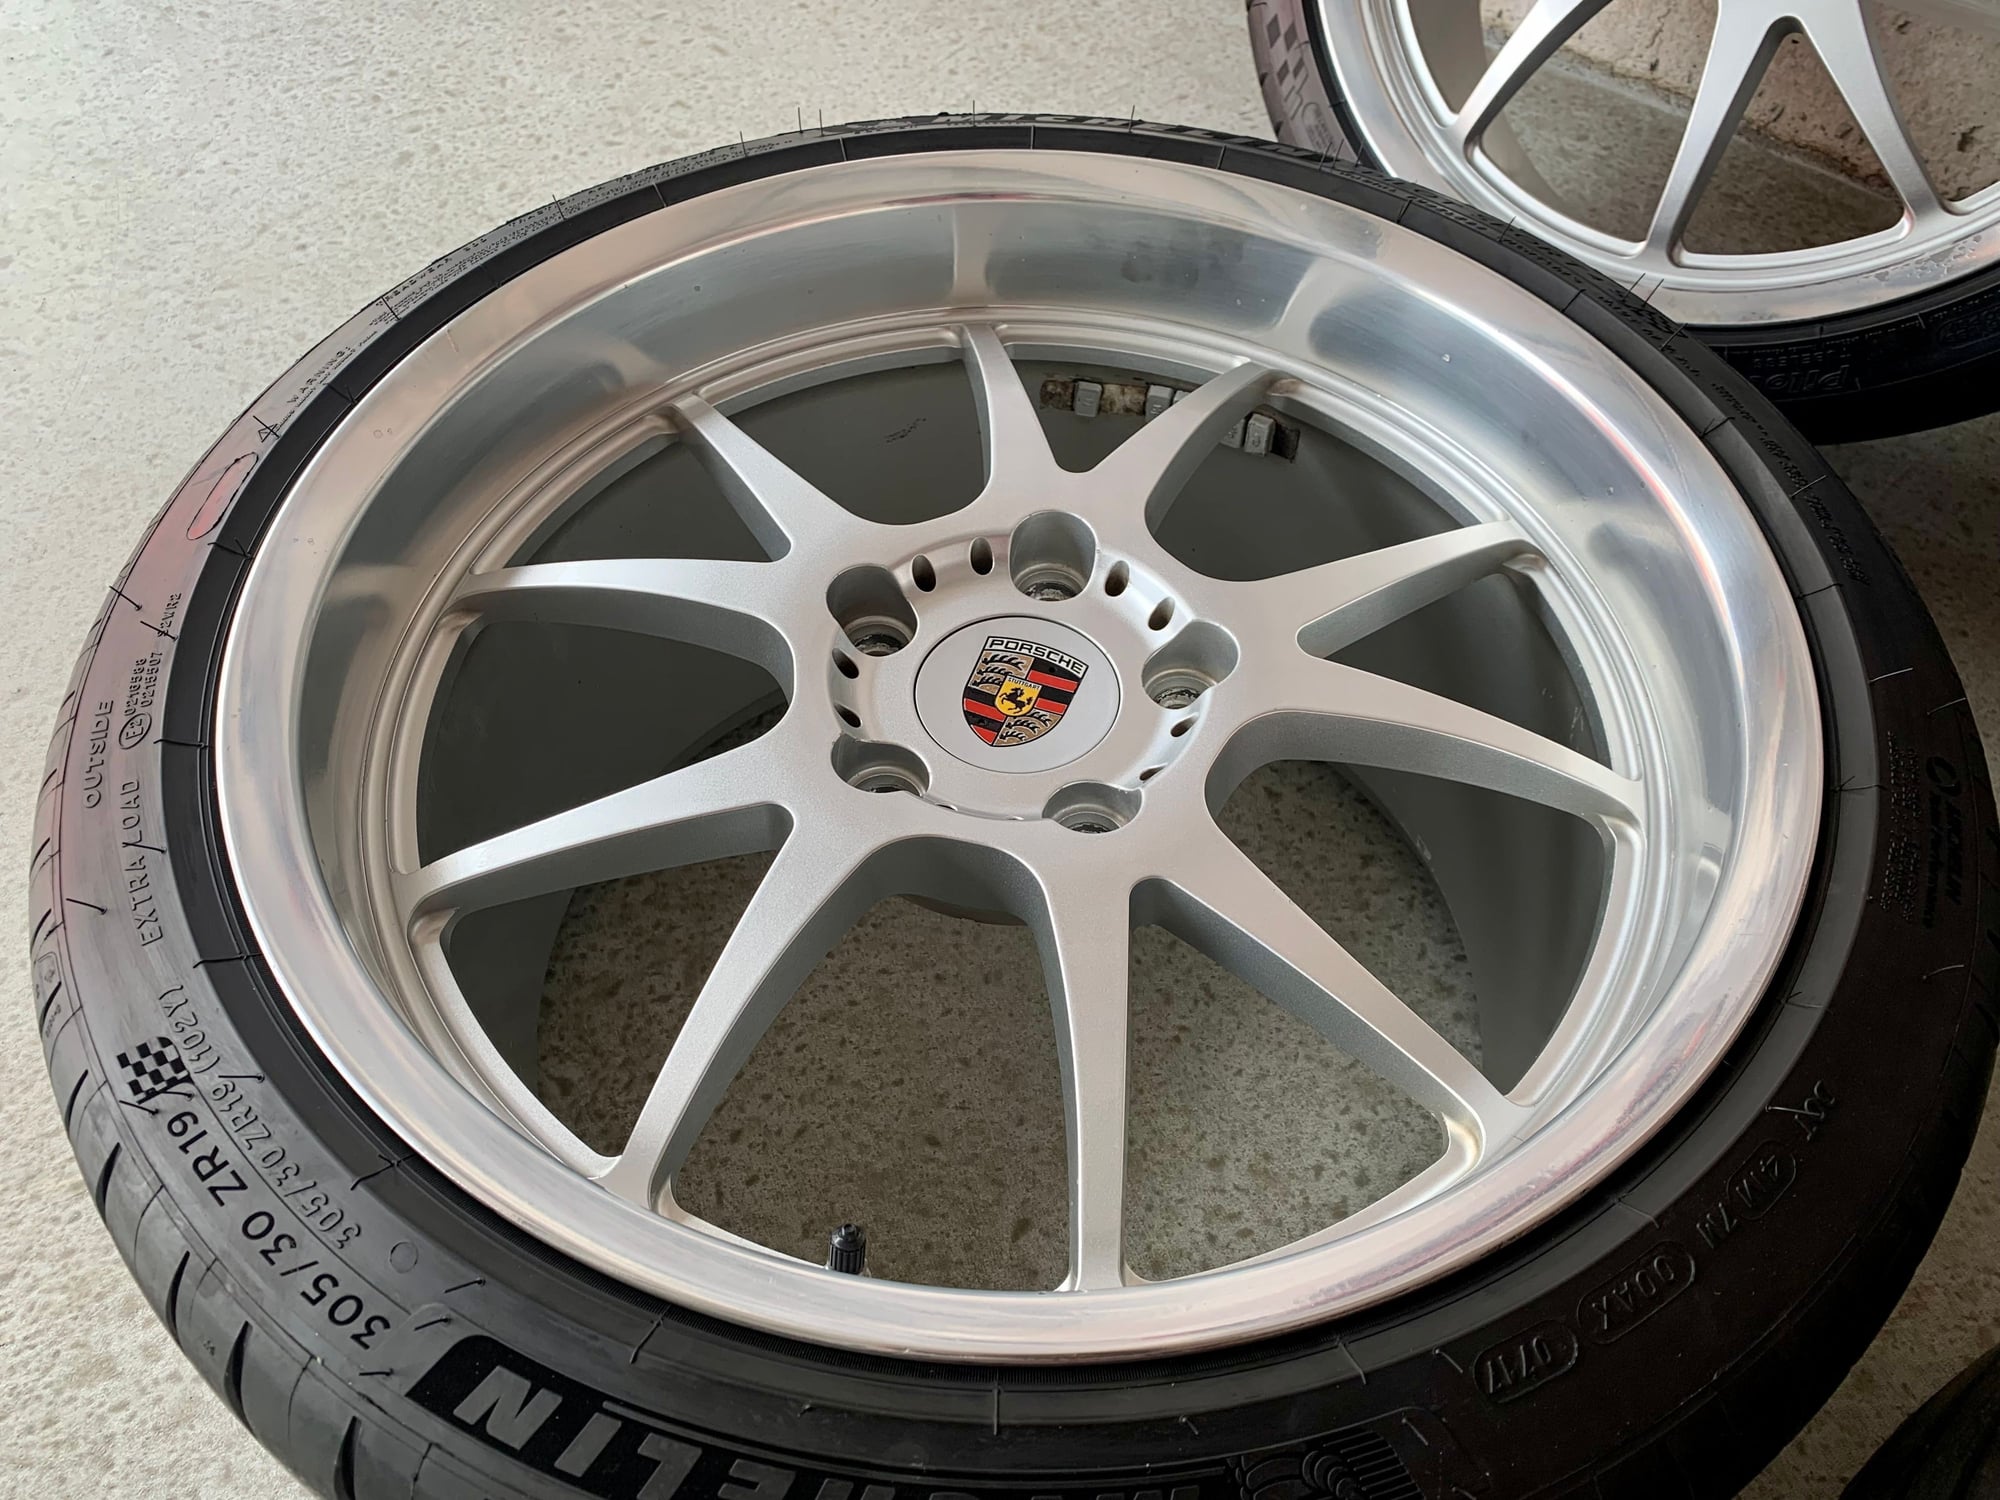 Wheels and Tires/Axles - Rare! Champion Motorsports RS98 Forged Wheels & Tires - Used - 0  All Models - Brampton, ON L6Y6C5, Canada